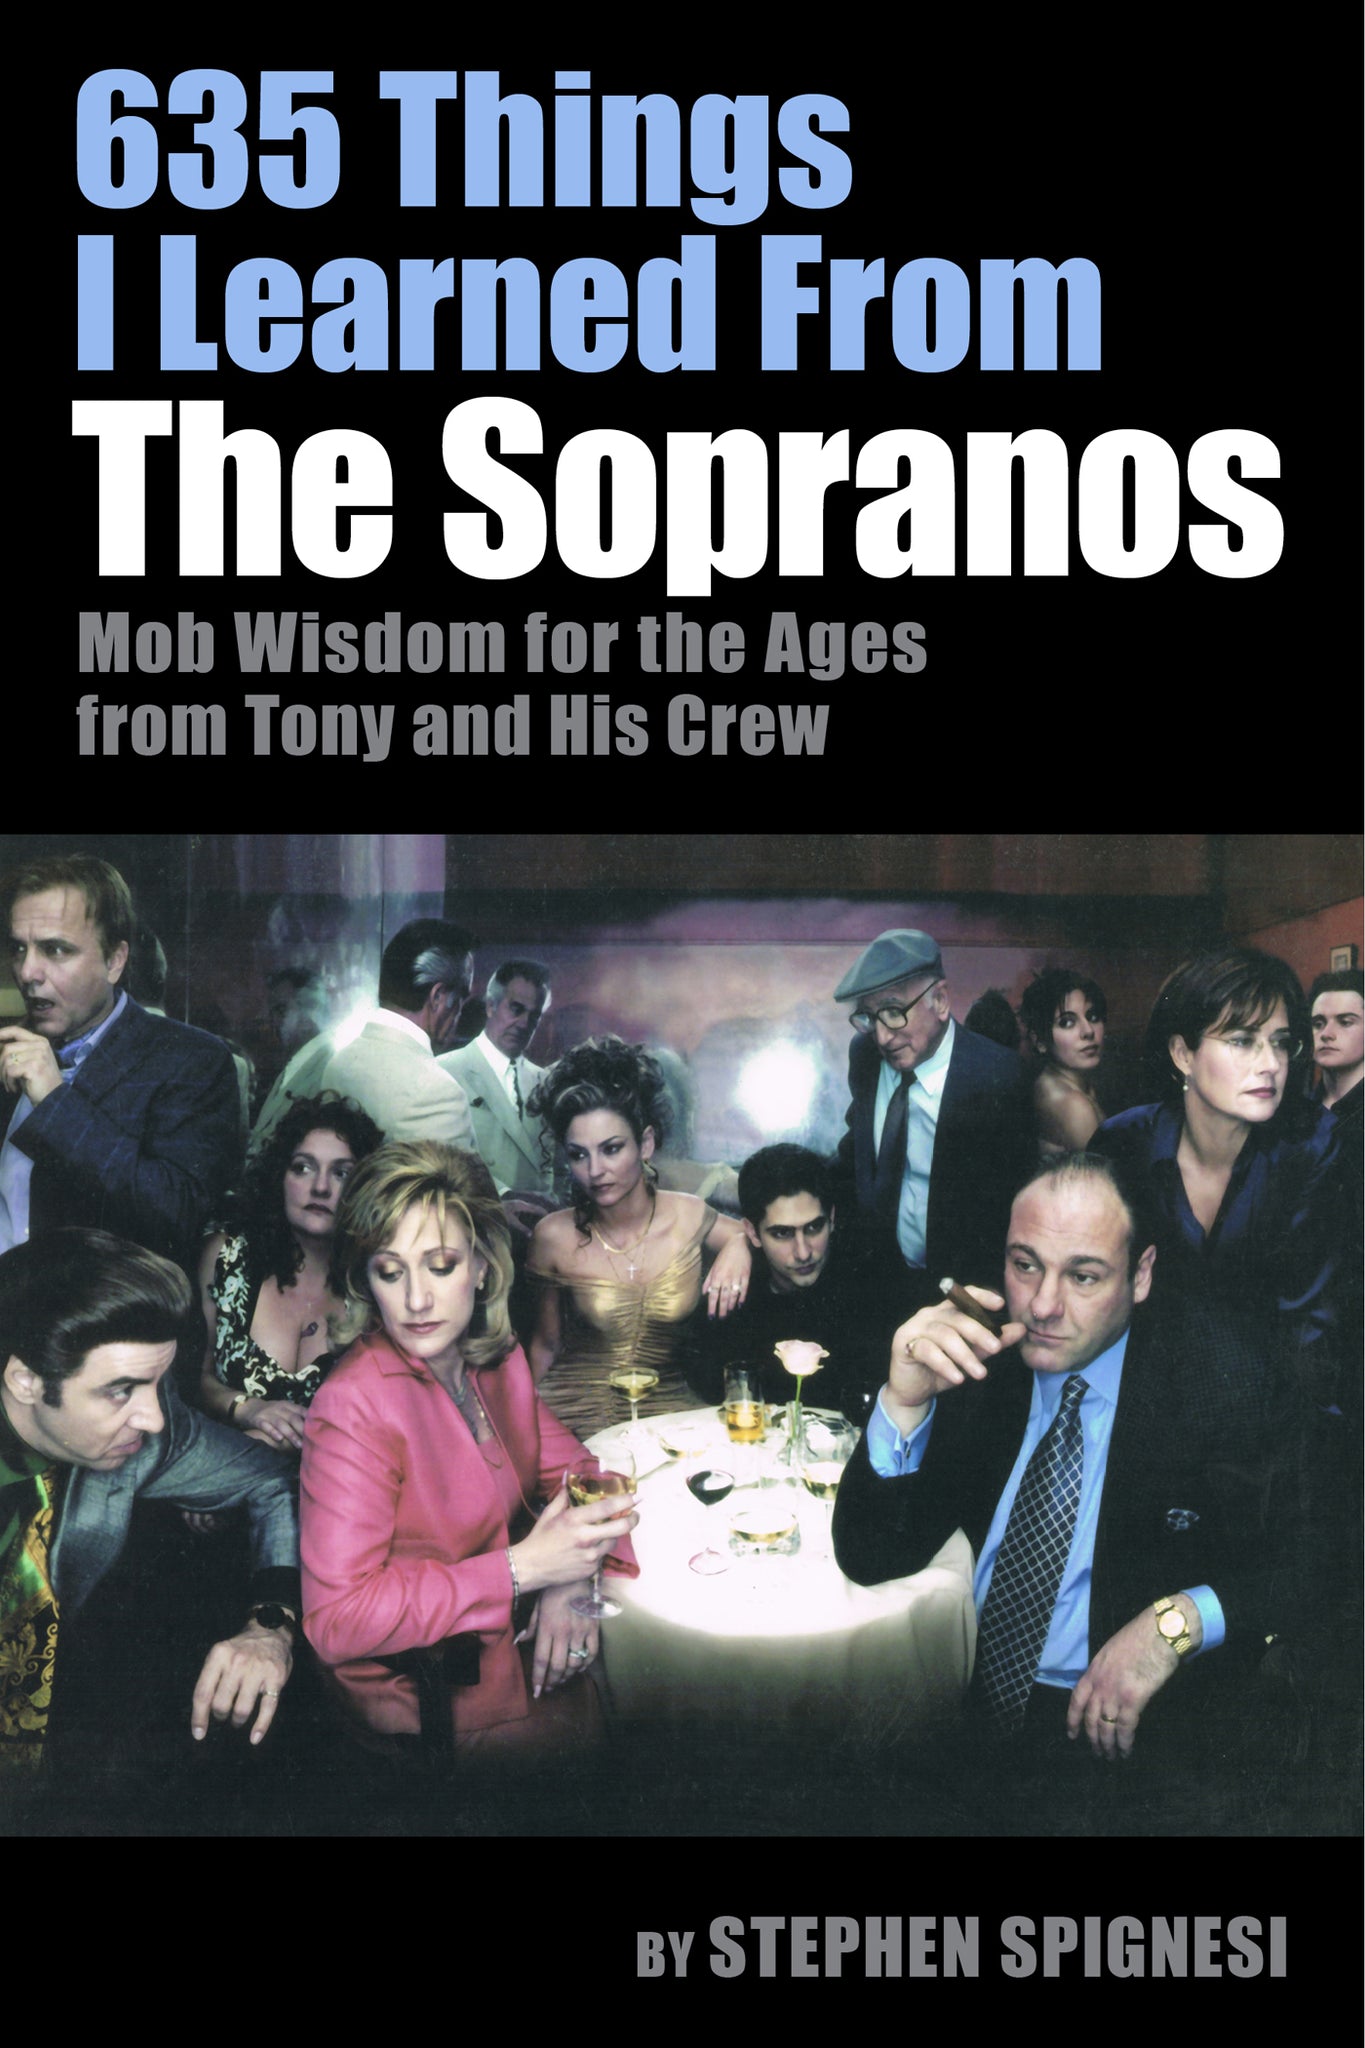 635 Things I Learned From The Sopranos_ Mob Wisdom for the Ages from Tony and His Crew (ebook) - BearManor Manor